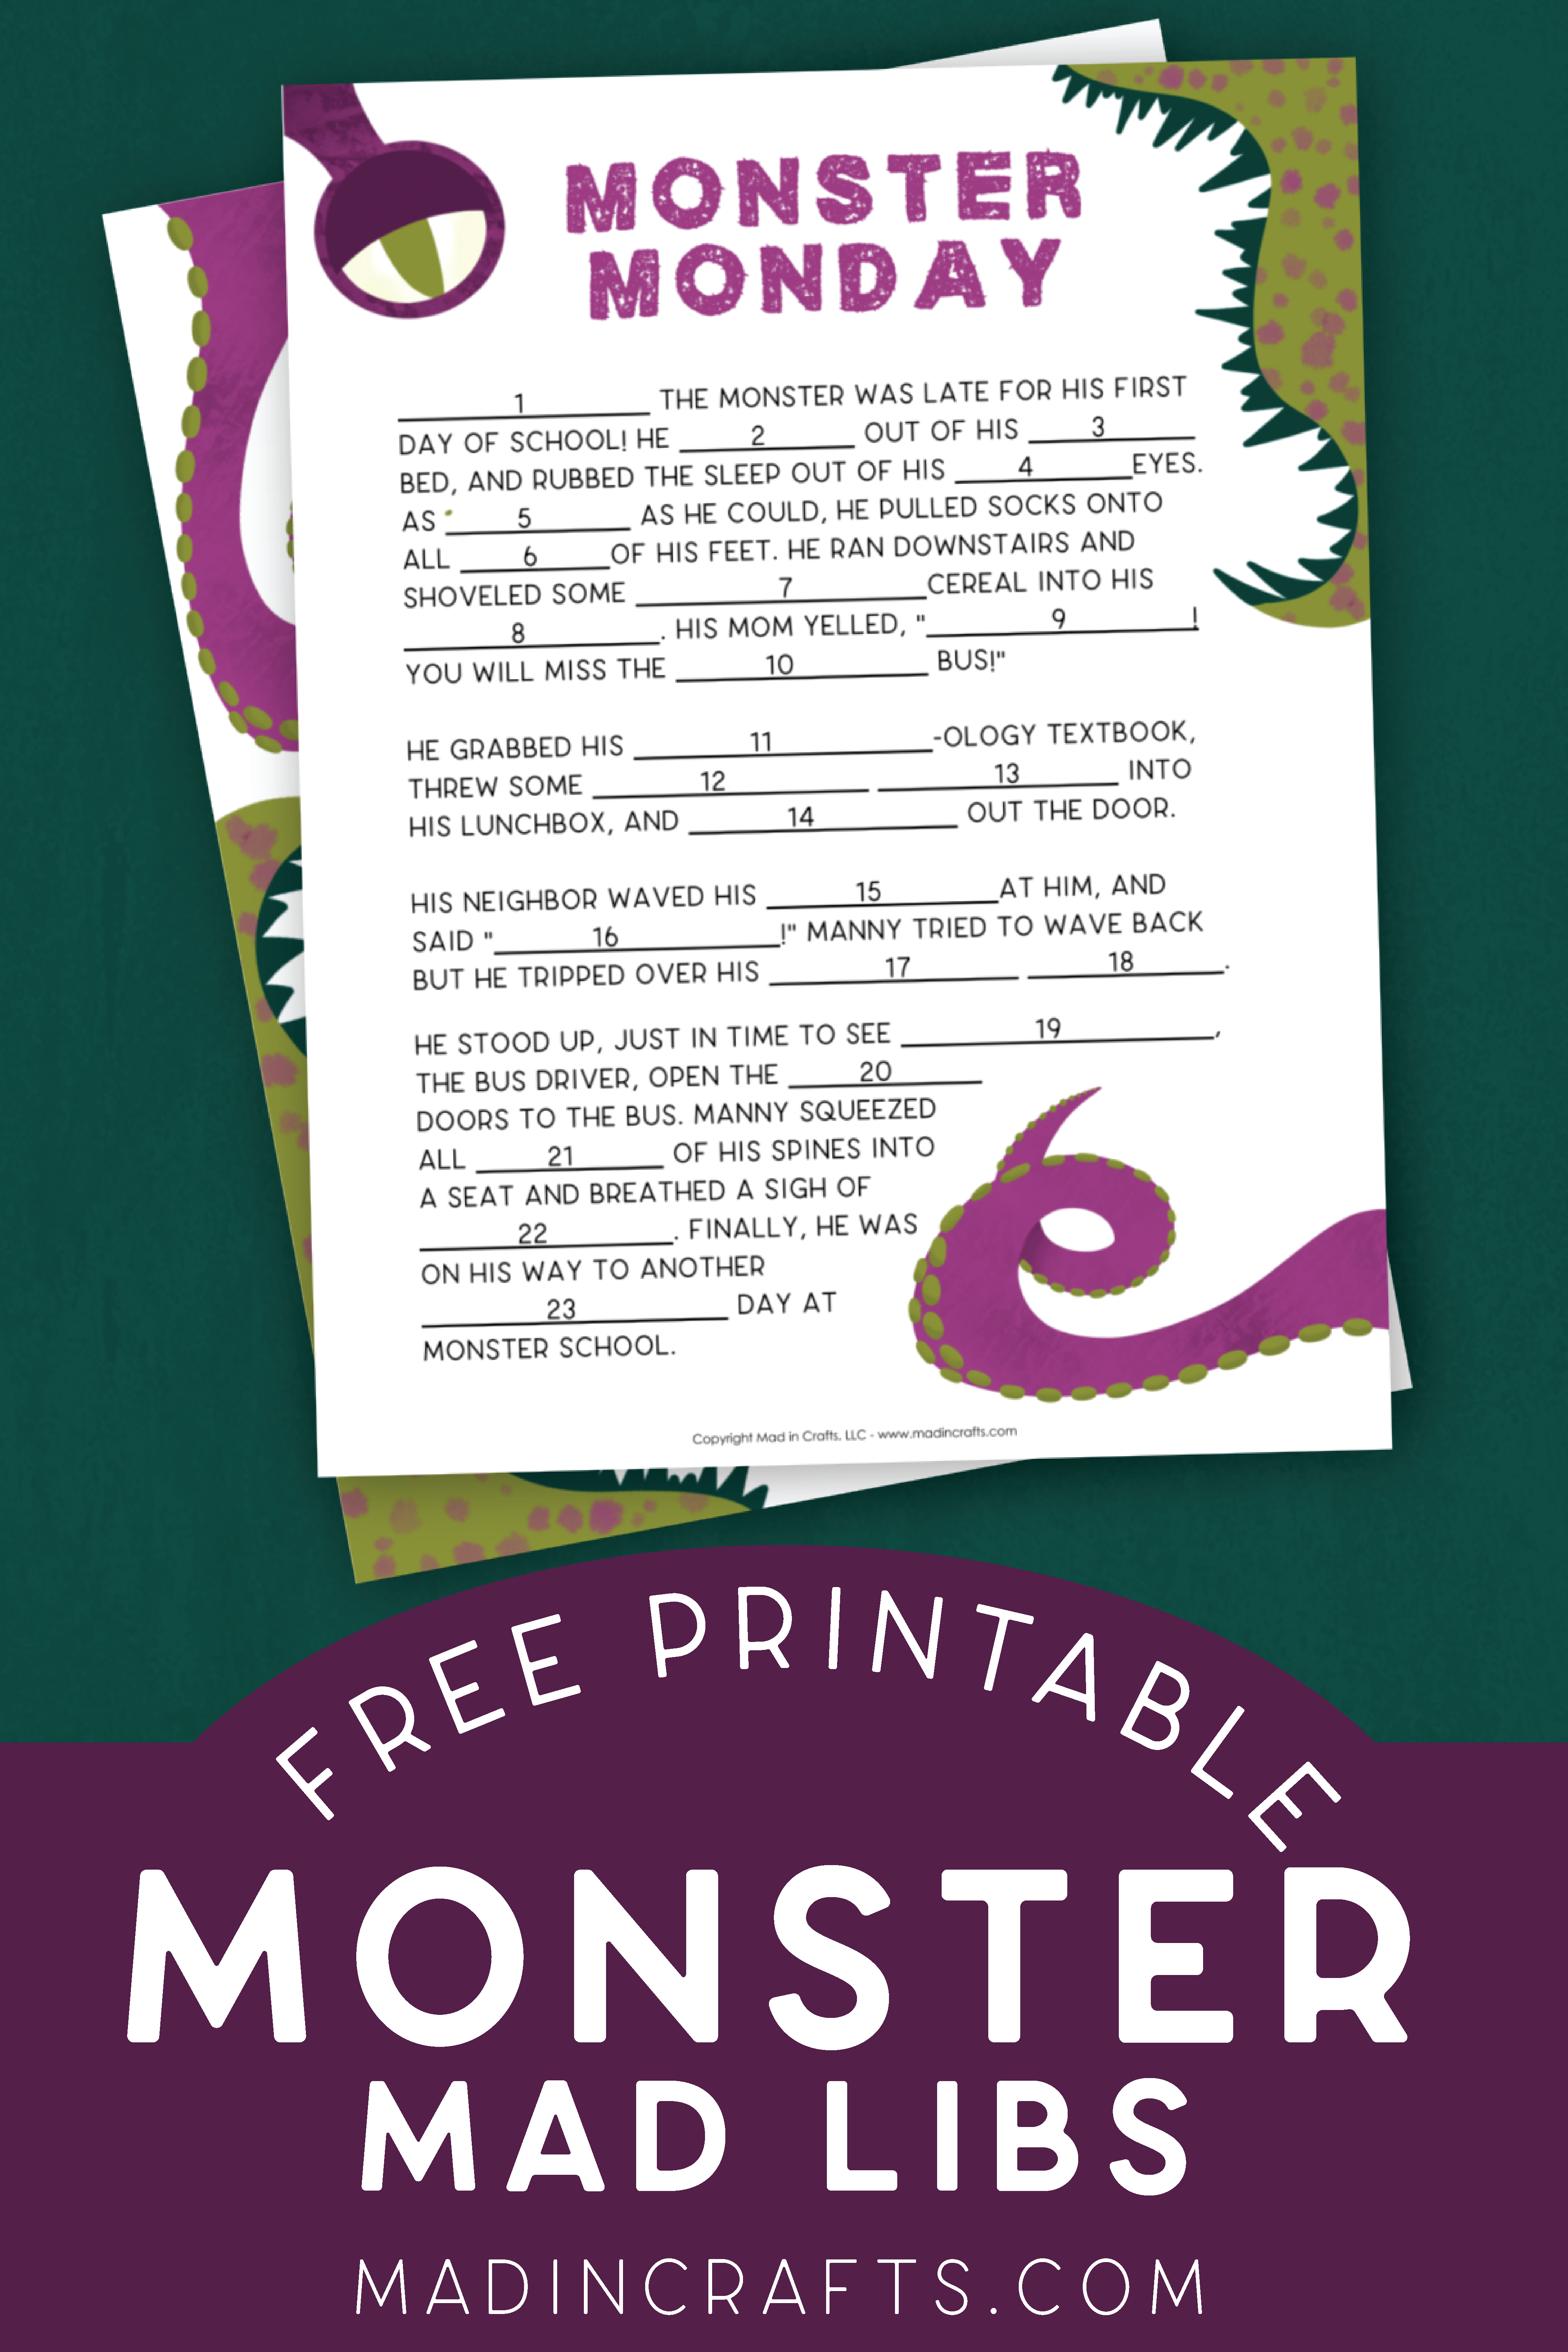 FREE MONSTER MAD LIBS PRINTABLE Crafts Mad In Crafts In 2021